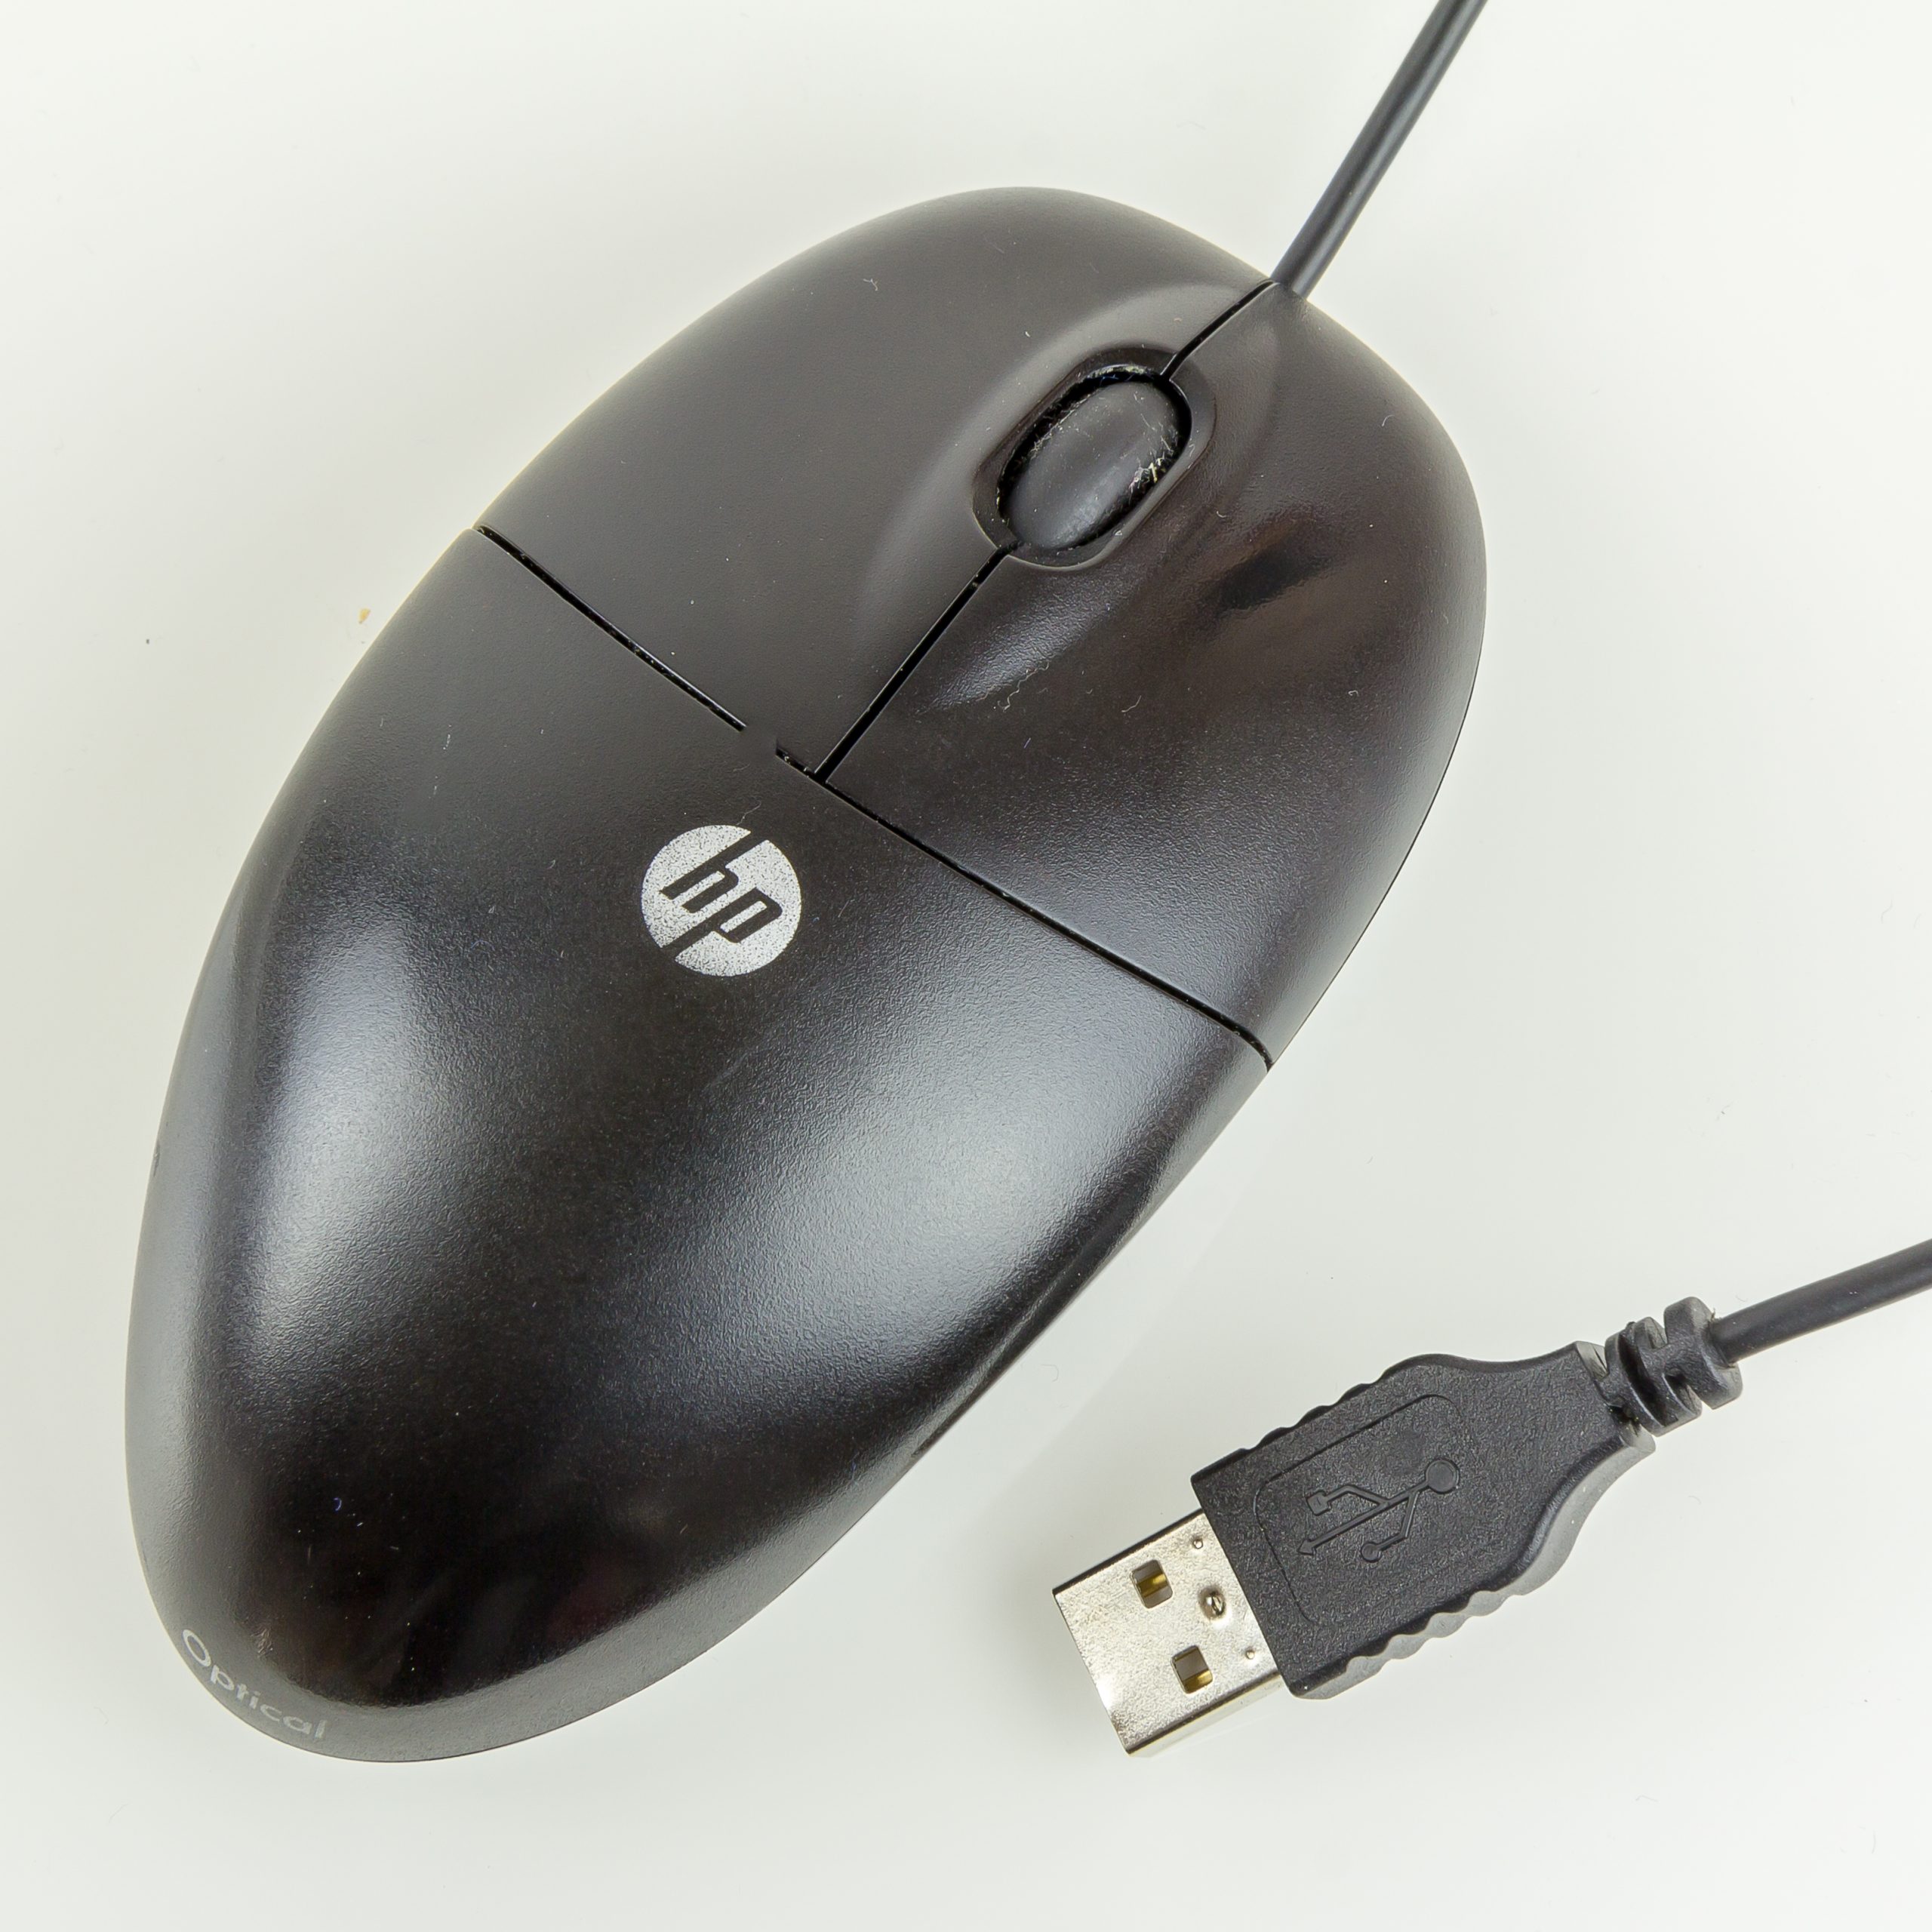 The Ultimate Guide on How to Plug a USB Mouse into a PC USB Port